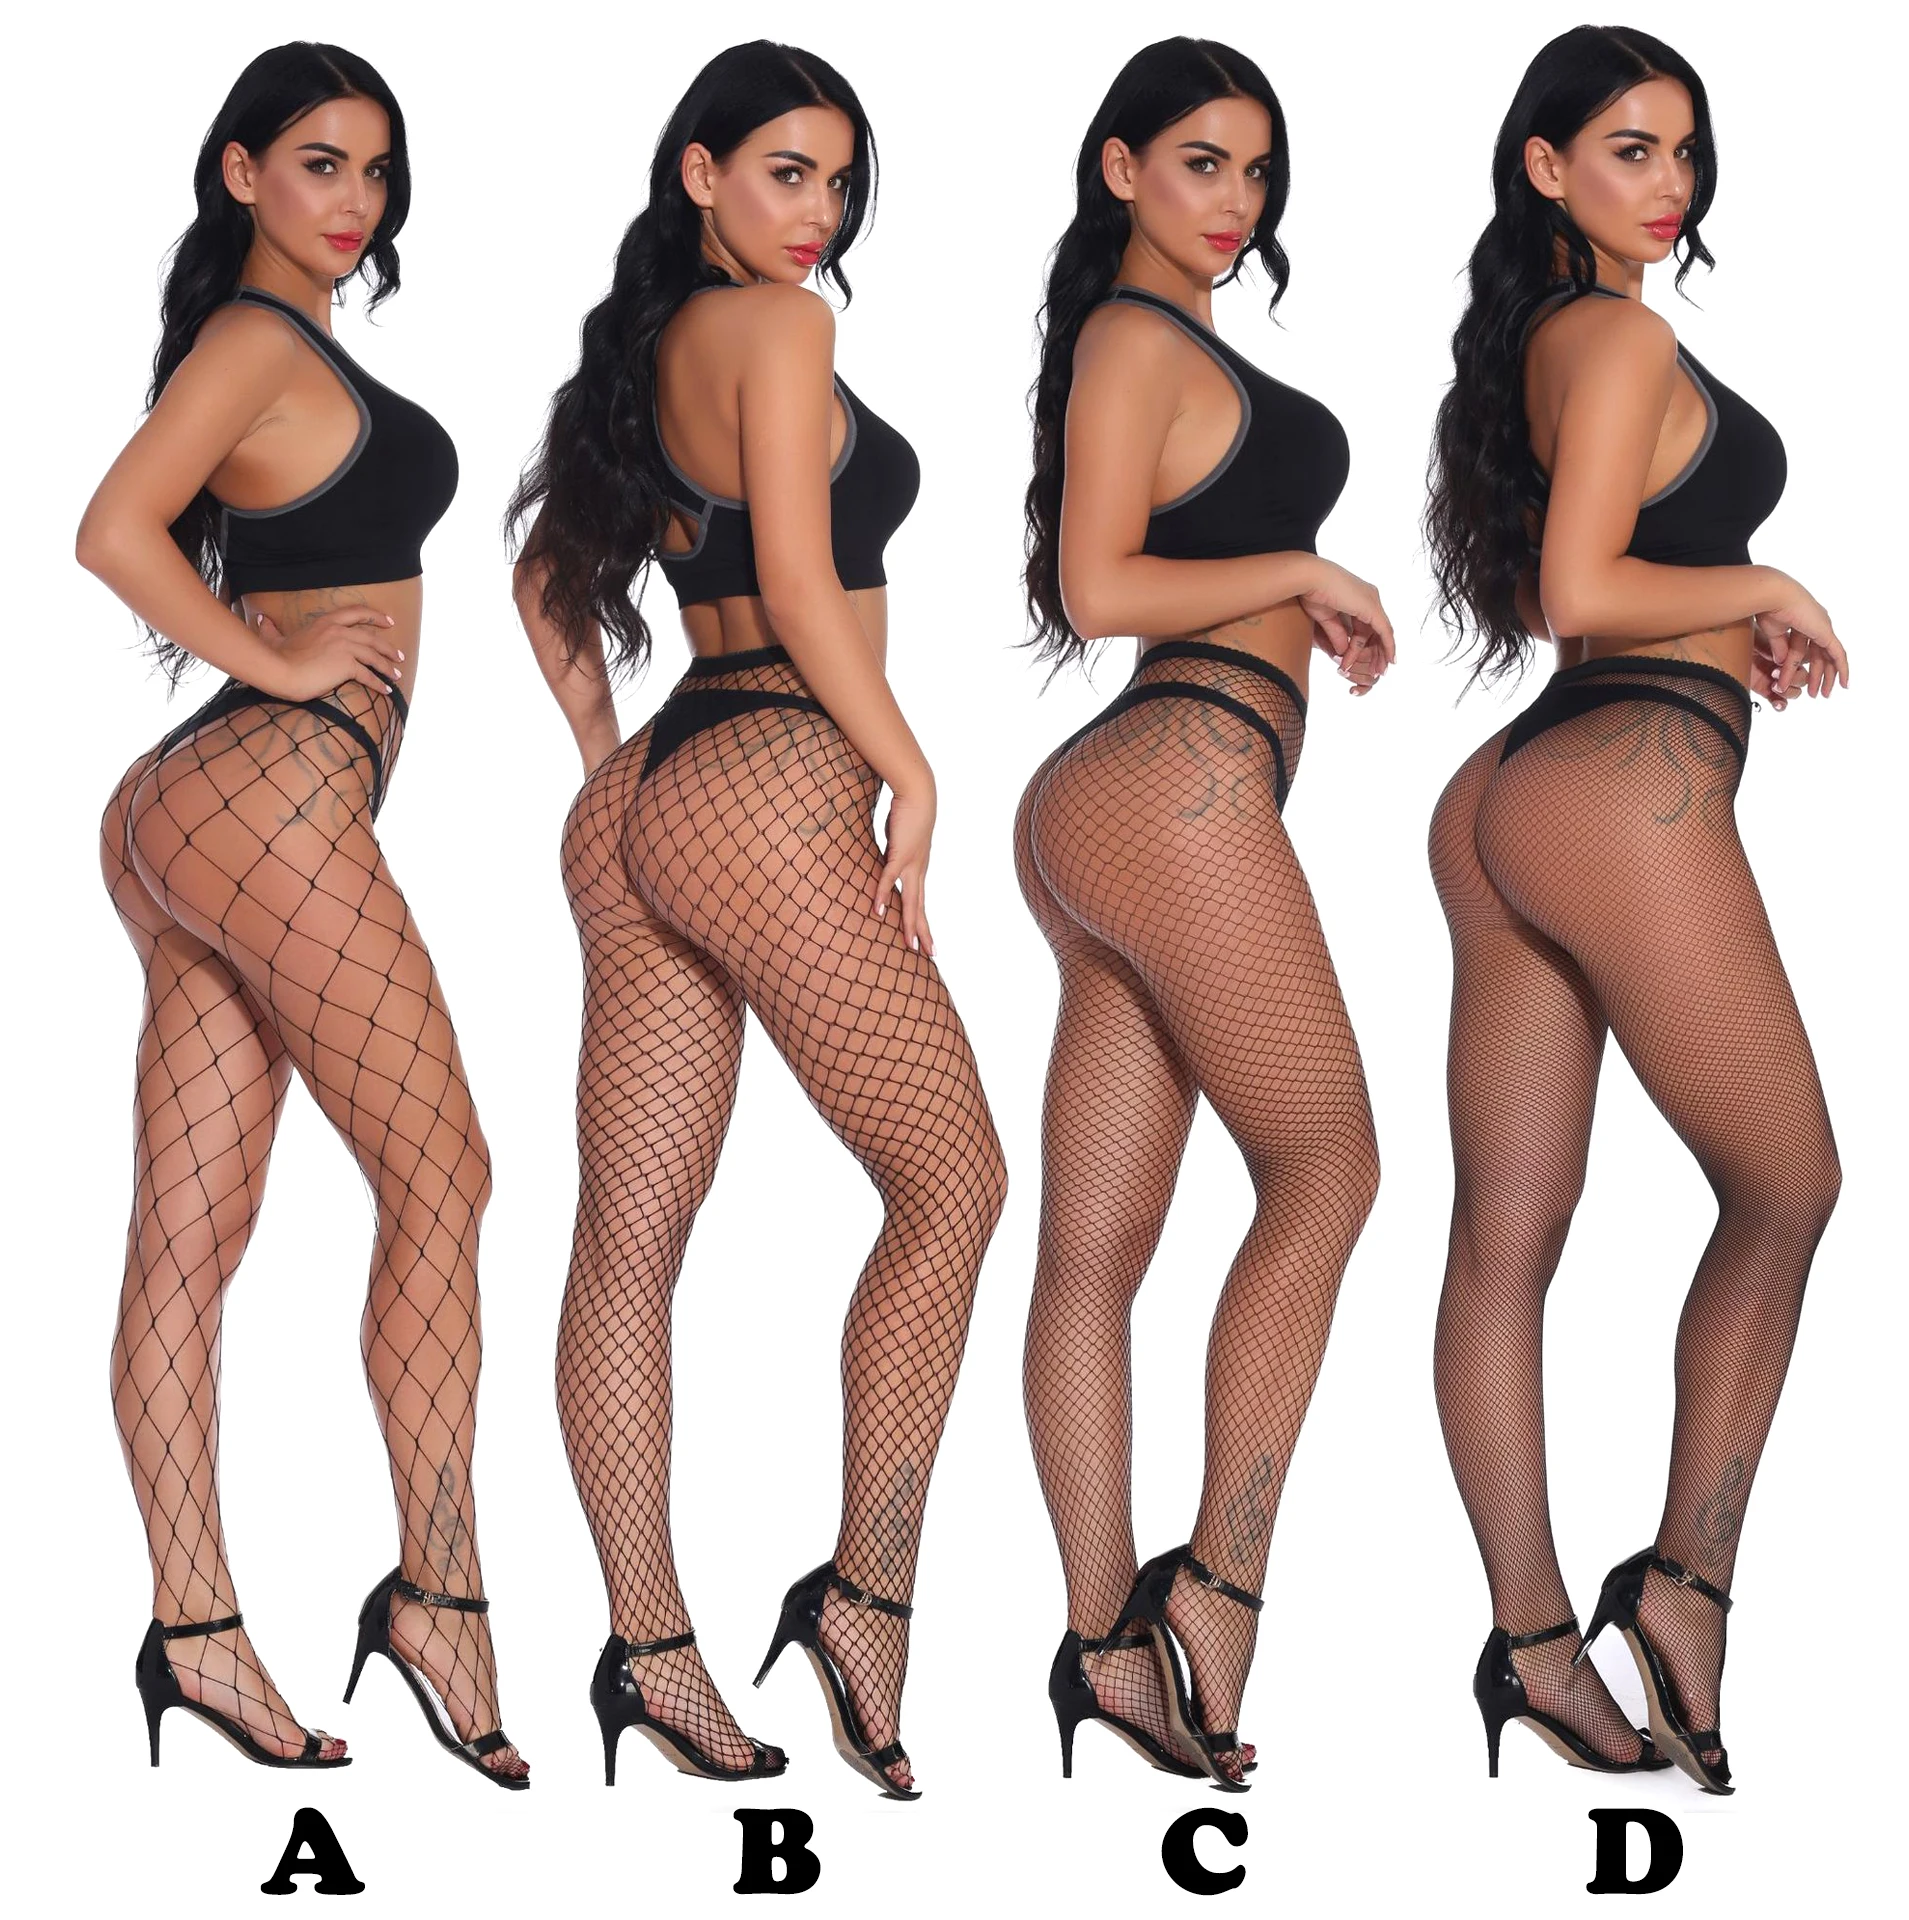 Black chicks in tights 15d Summer Hot Sale Sexy Women S Ladies Girls Fence Net Stockings Lace Fishnet Thigh Highs Sheer Silk Stocking Hollow Stockings Buy Sexy Lingerie Lace Stocking Black White Transparent Stock Hot Sexy Legs